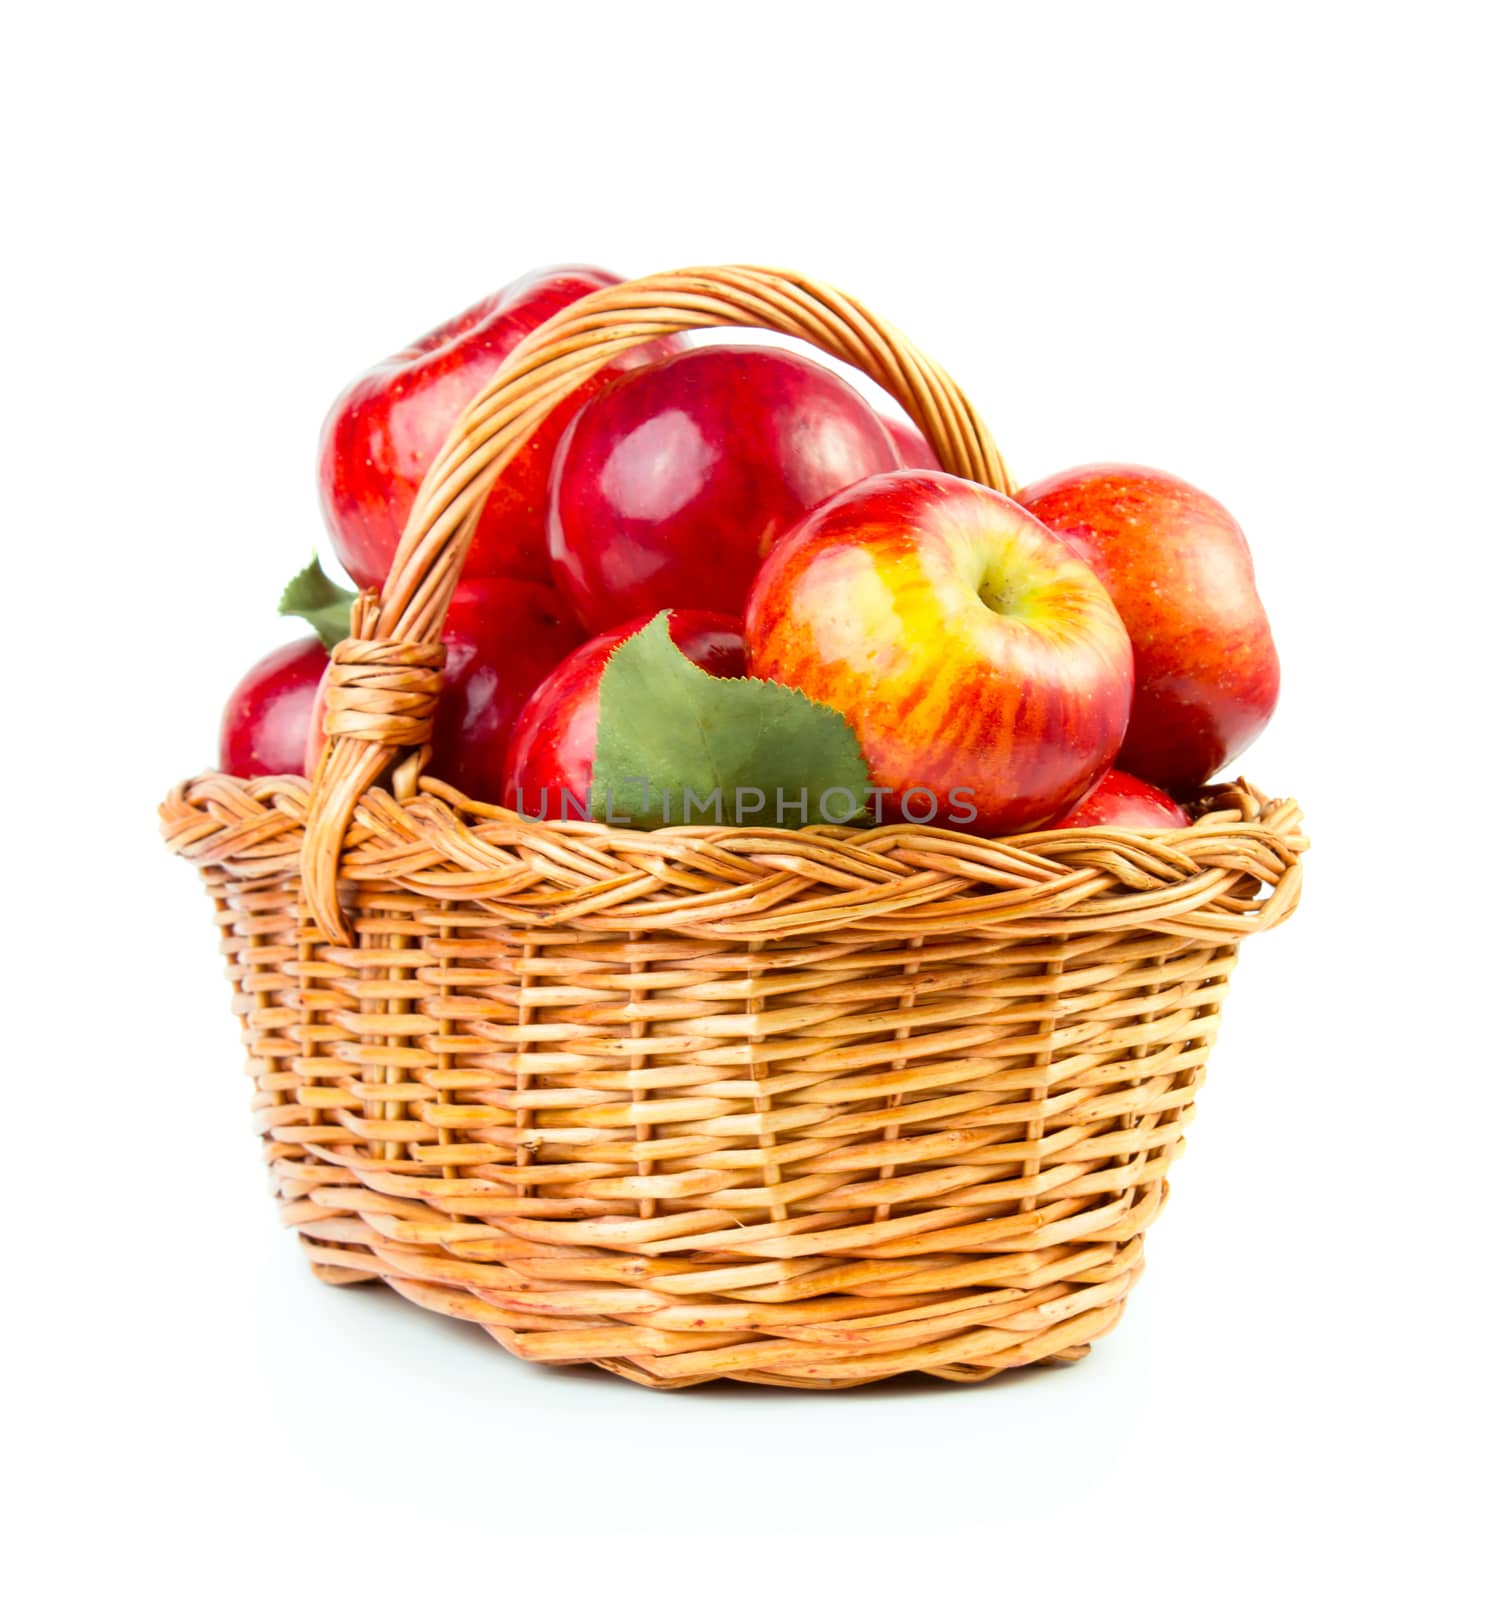 Fresh red apples in basket isolated on white background